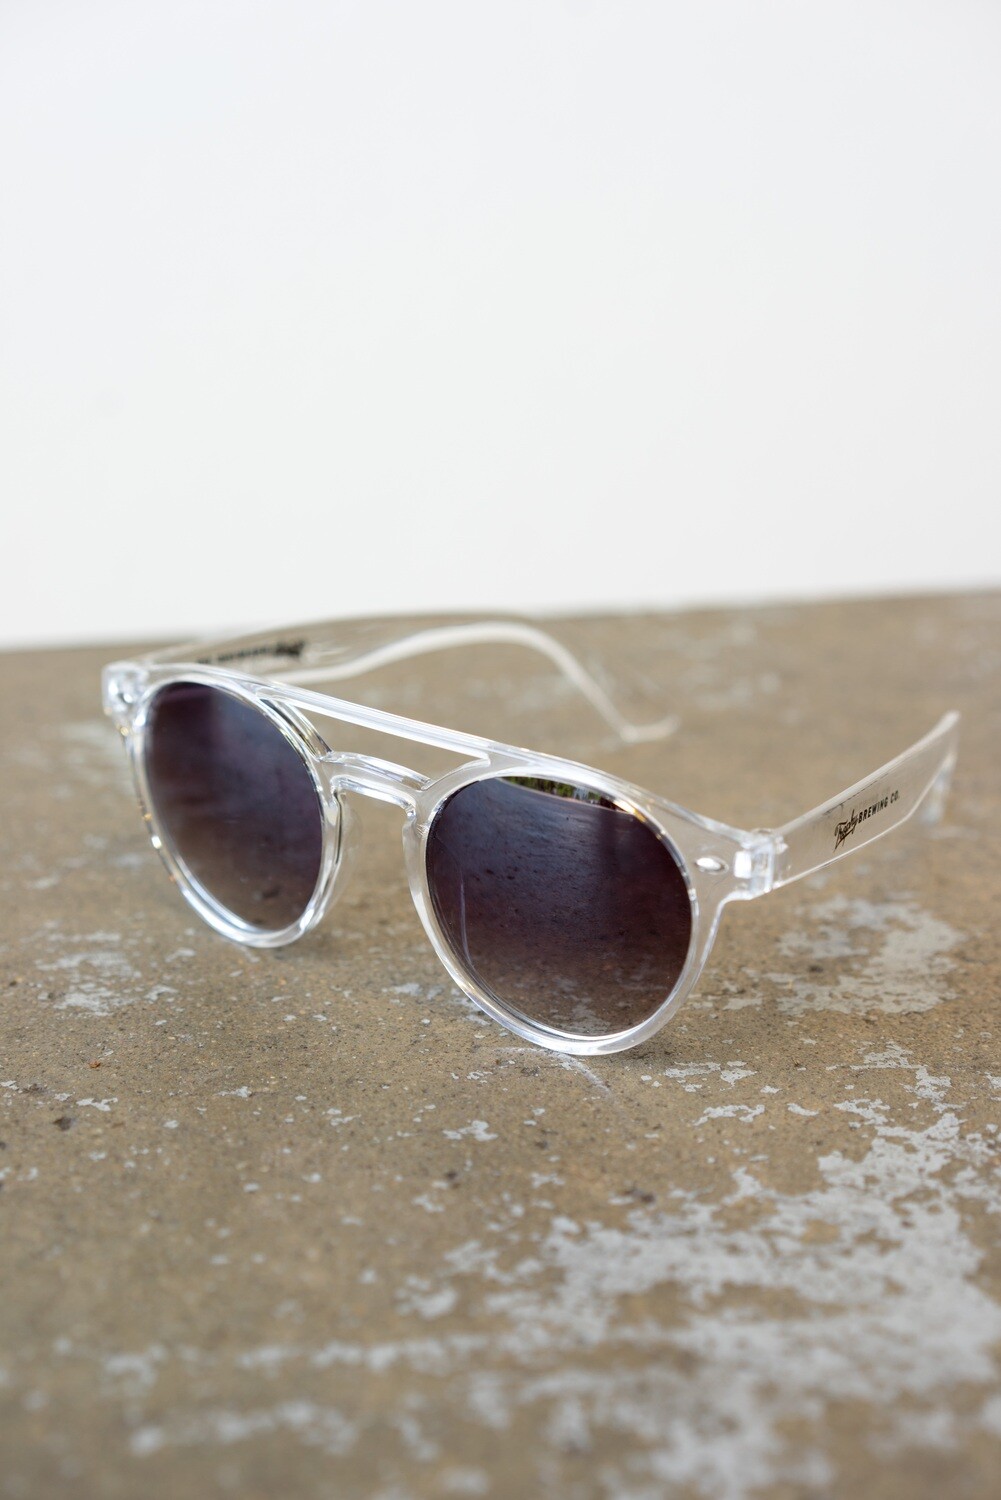 Clear Trophy Sunglasses